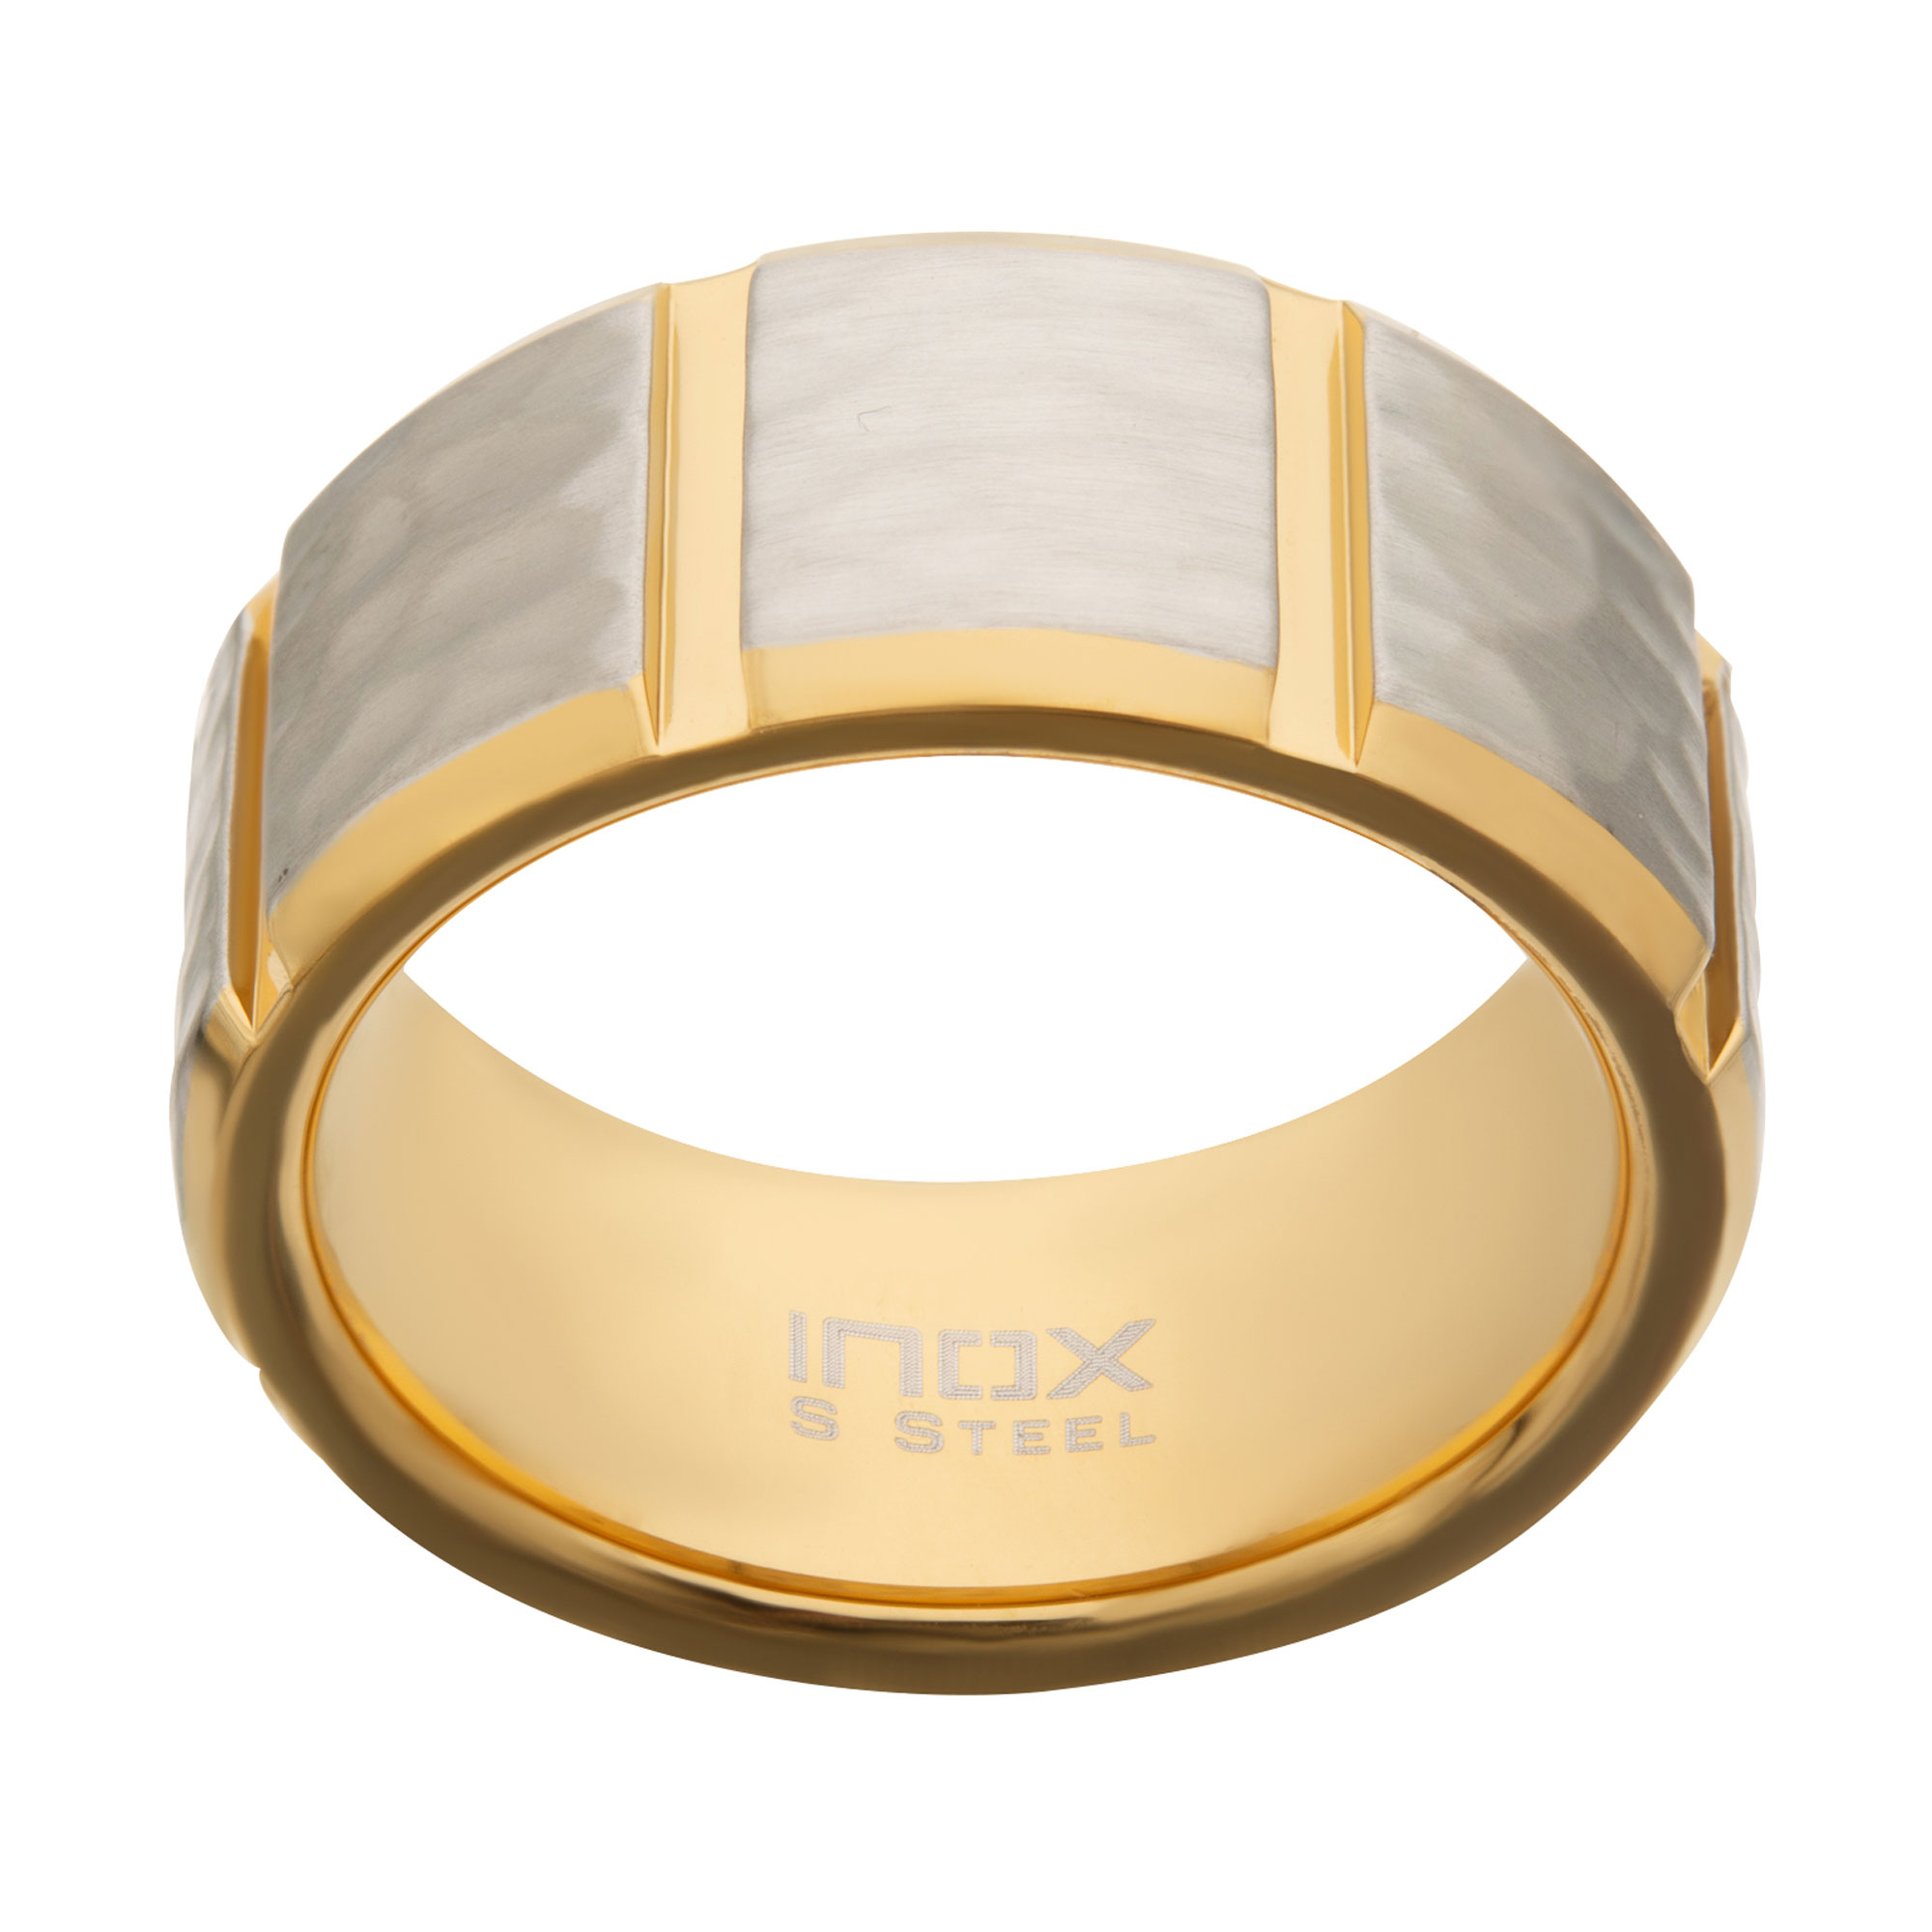 Gold Plated and Stainless Steel Hammered Finish Ring Image 2 Spath Jewelers Bartow, FL